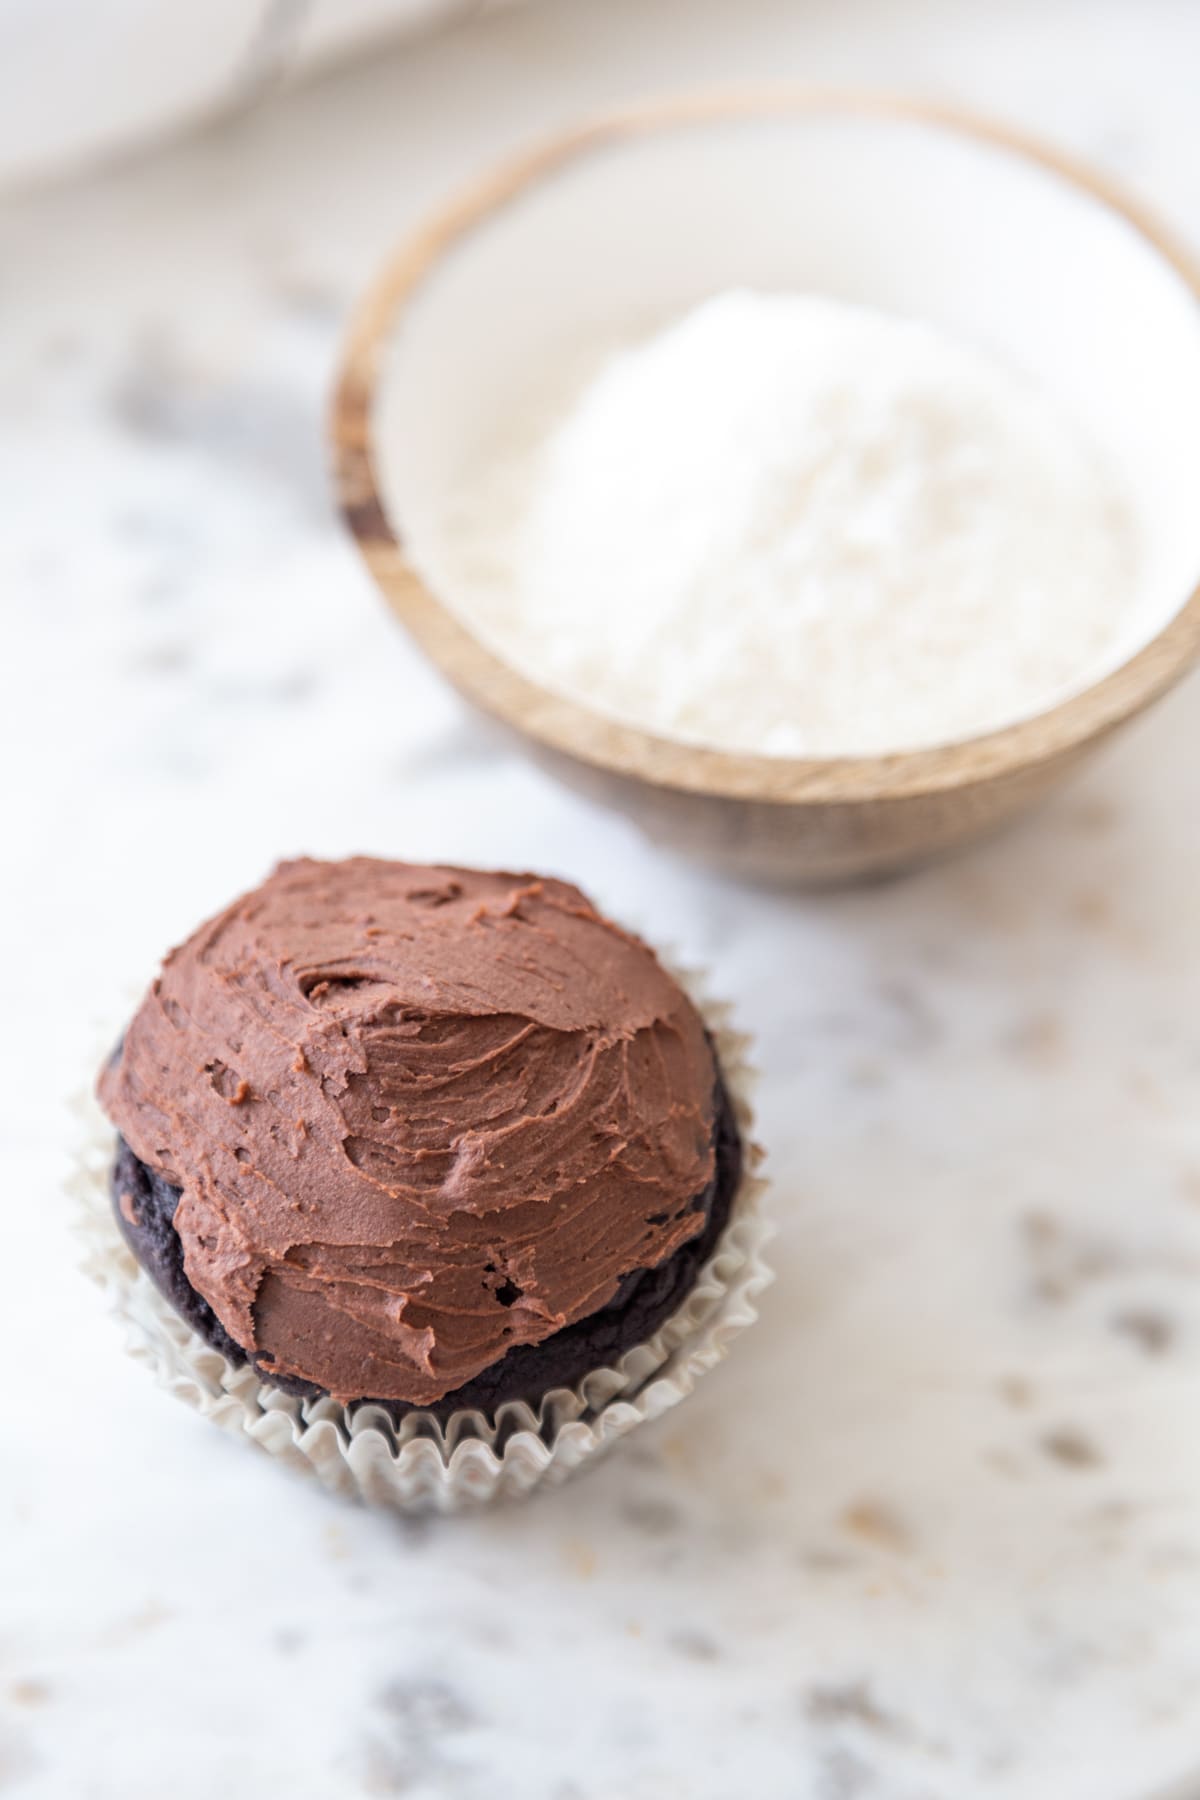 A chocolate cupcake with chocolate frosting and a bowl of shredded coconut next to the cupcake.